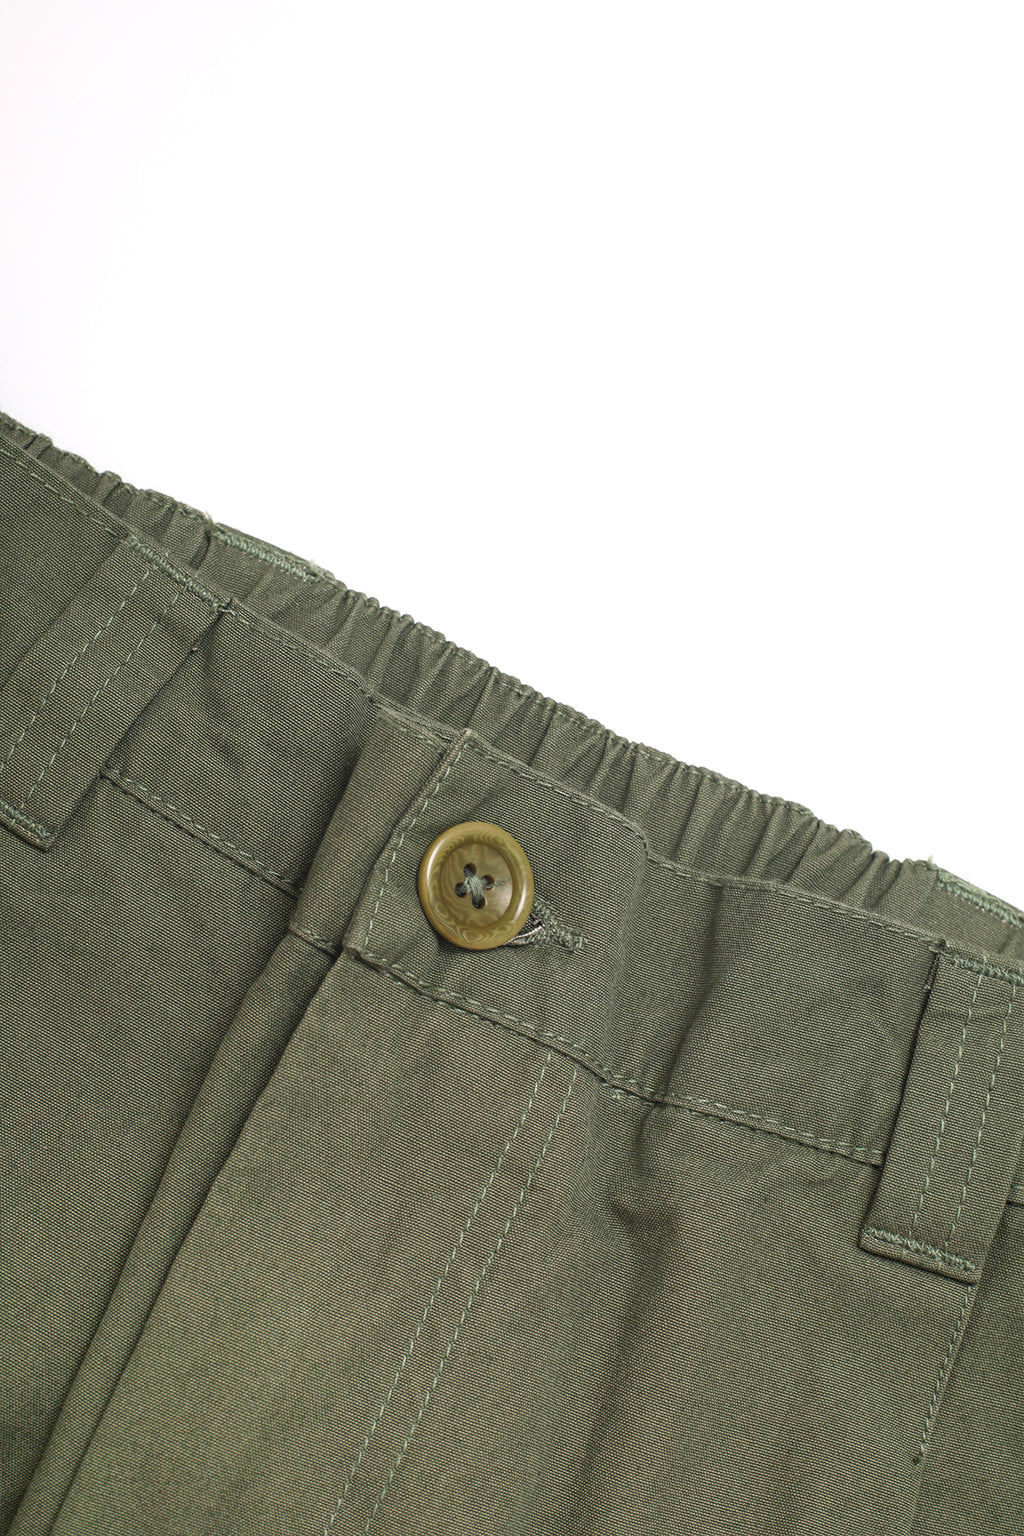 Service Works - Canvas Waiters Pant - Olive